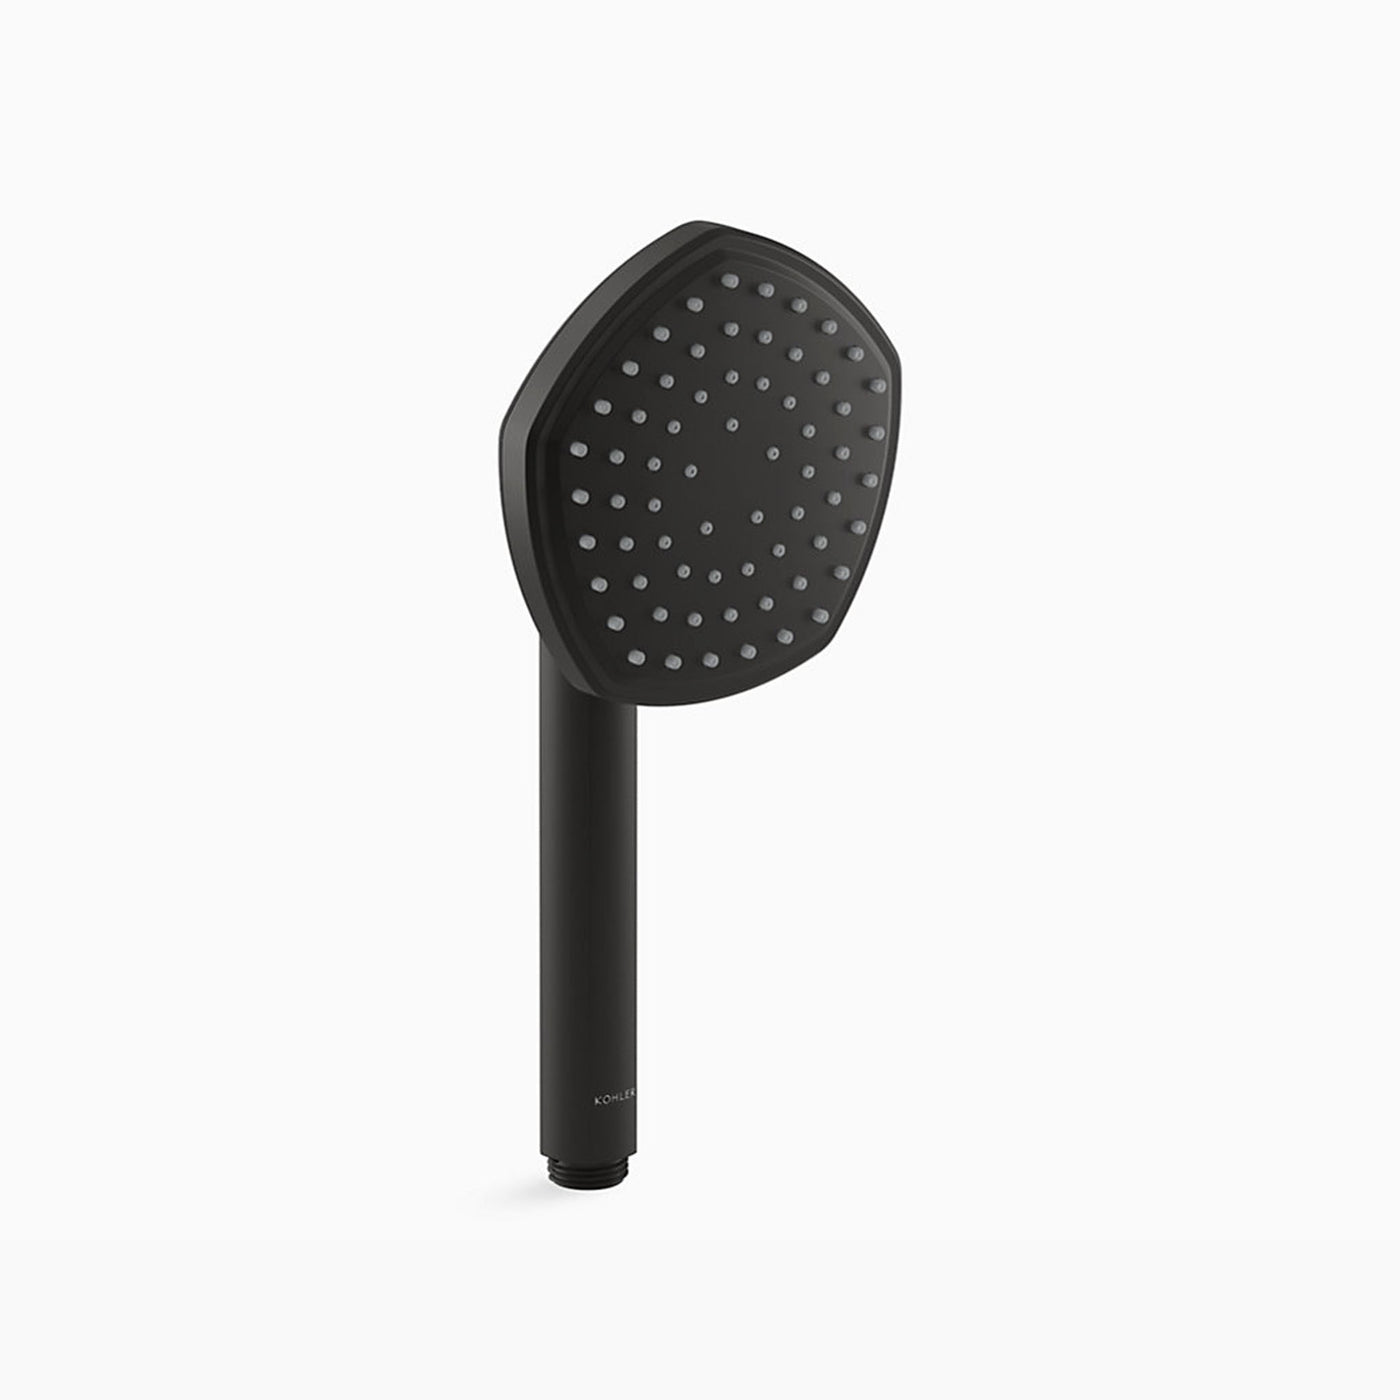 Occasion™ Single-function handshower, 2.5 gpm